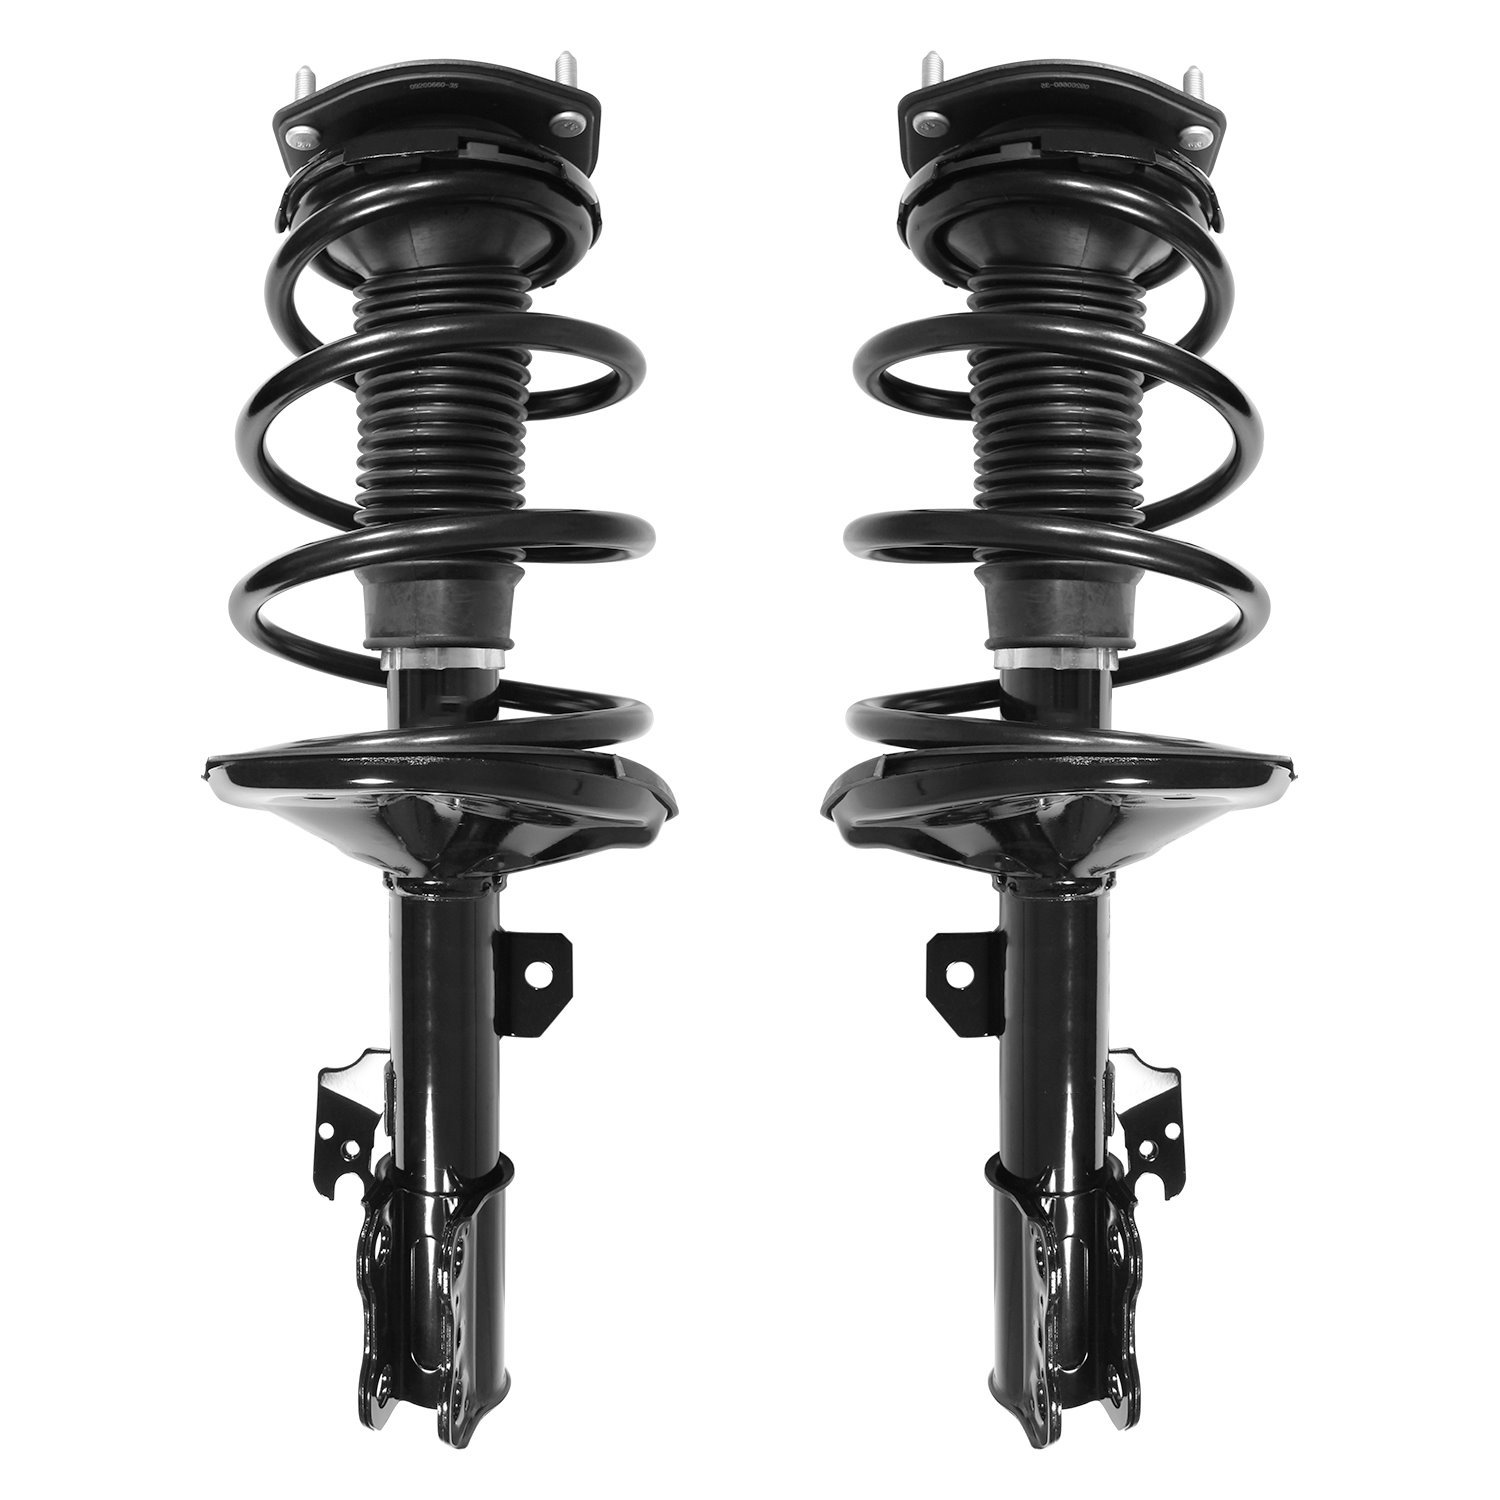 2-11701-11702-001 Suspension Strut & Coil Spring Assembly Set Fits Select Lexus ES300, Toyota Camry